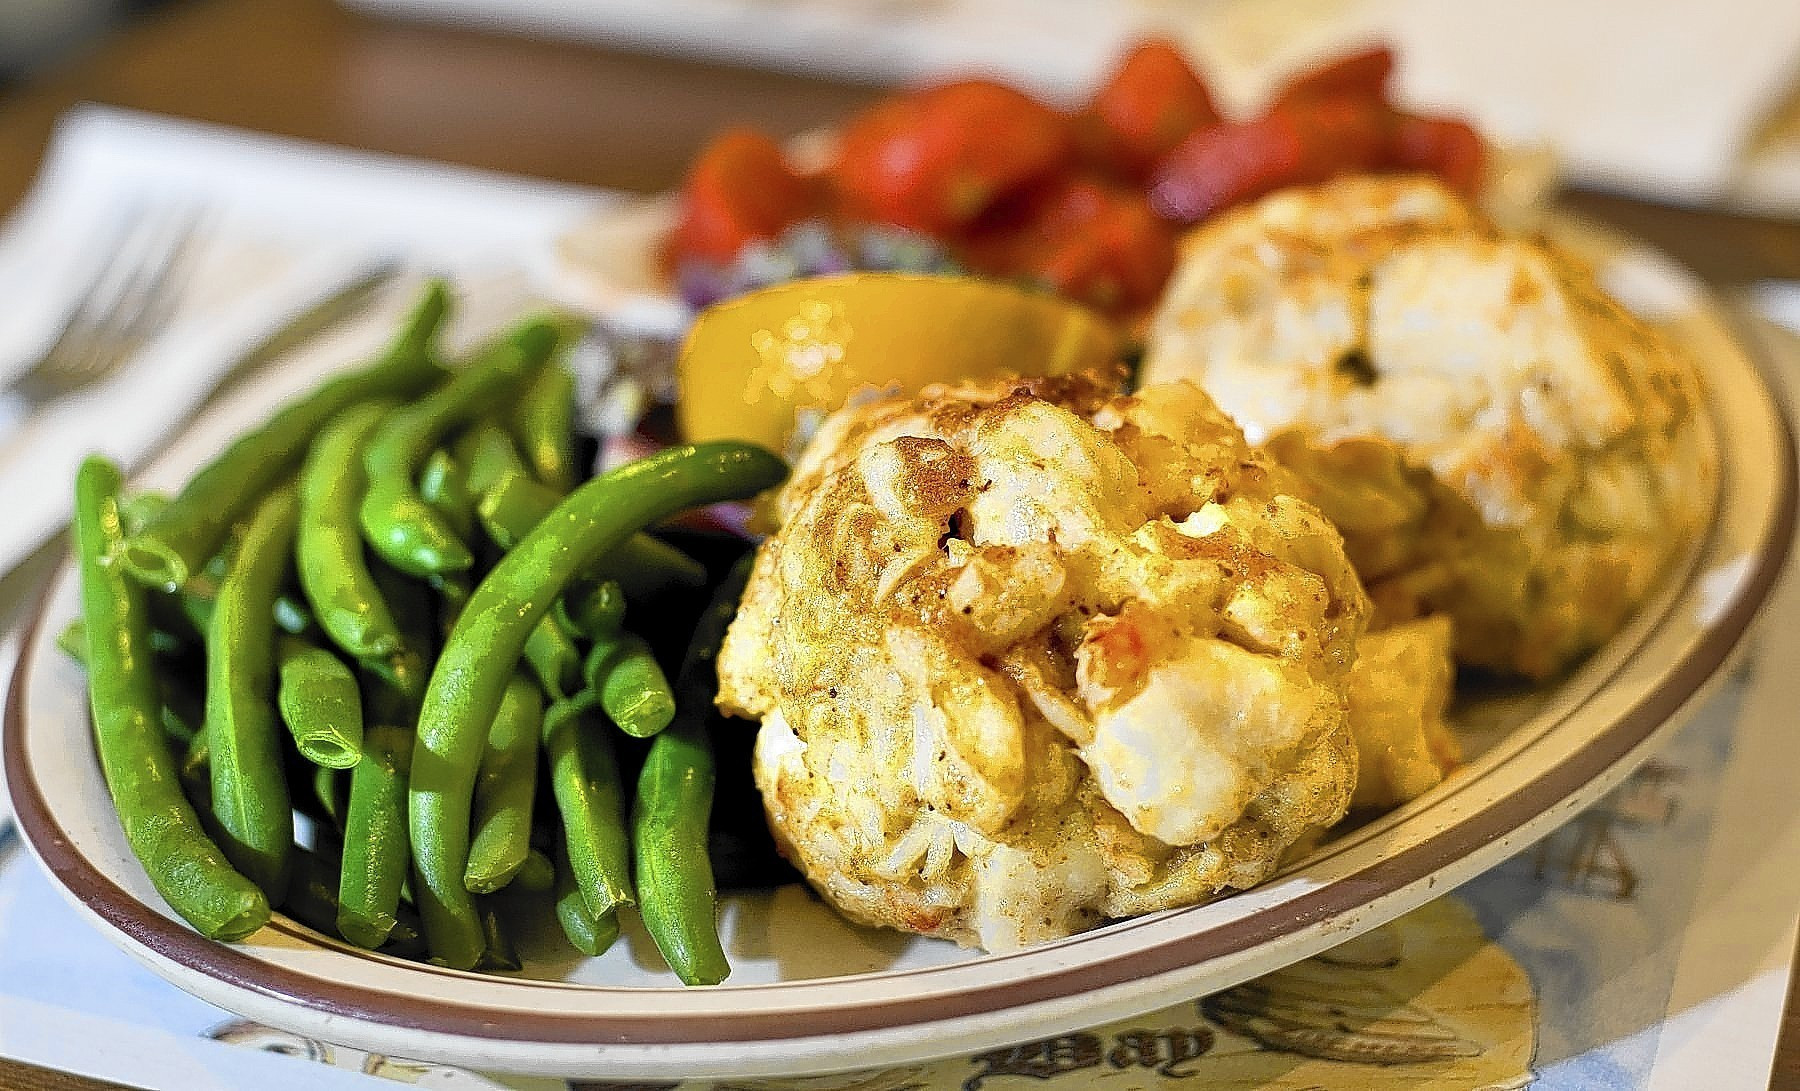 Capitol Hill Crab Cakes
 Critics readers weigh in on Annapolis area s best crab